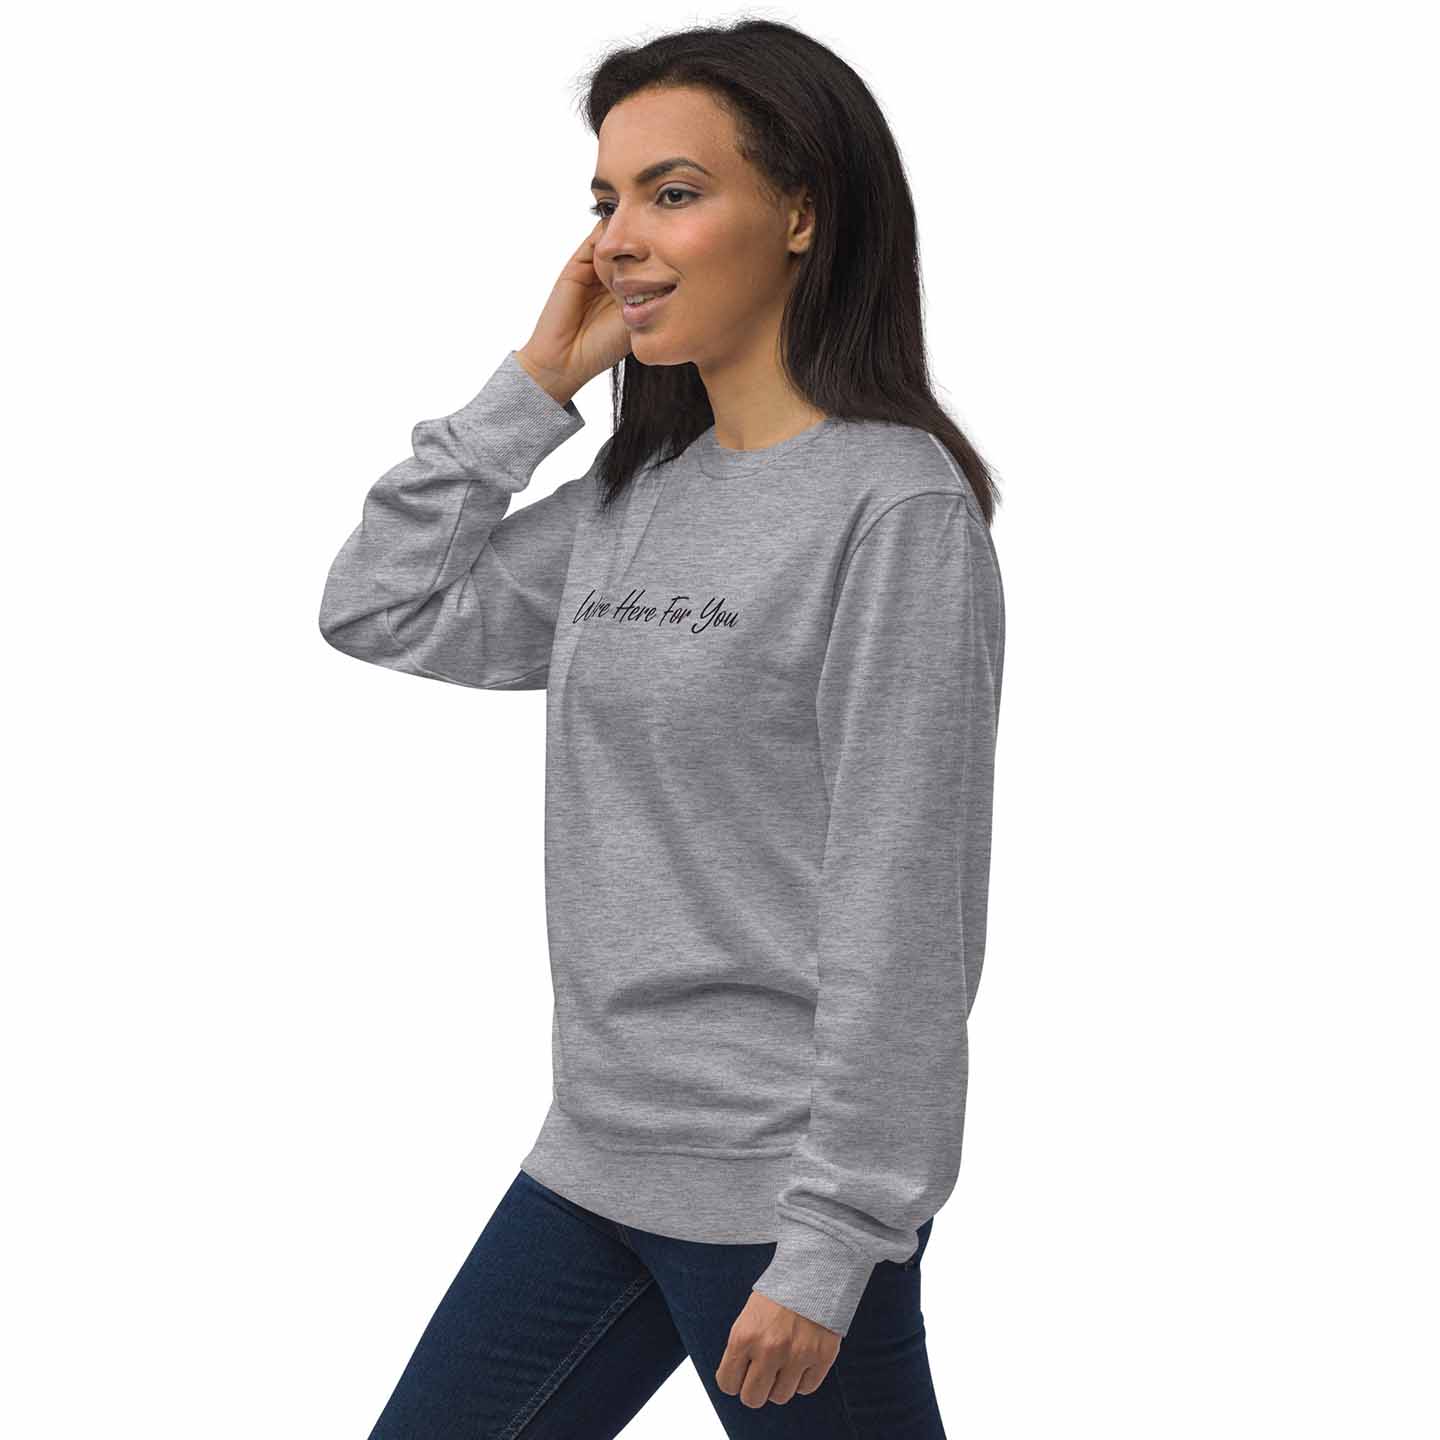 Women light gray inspirational sweatshirt with inspirational quote, "We Are Here For You."